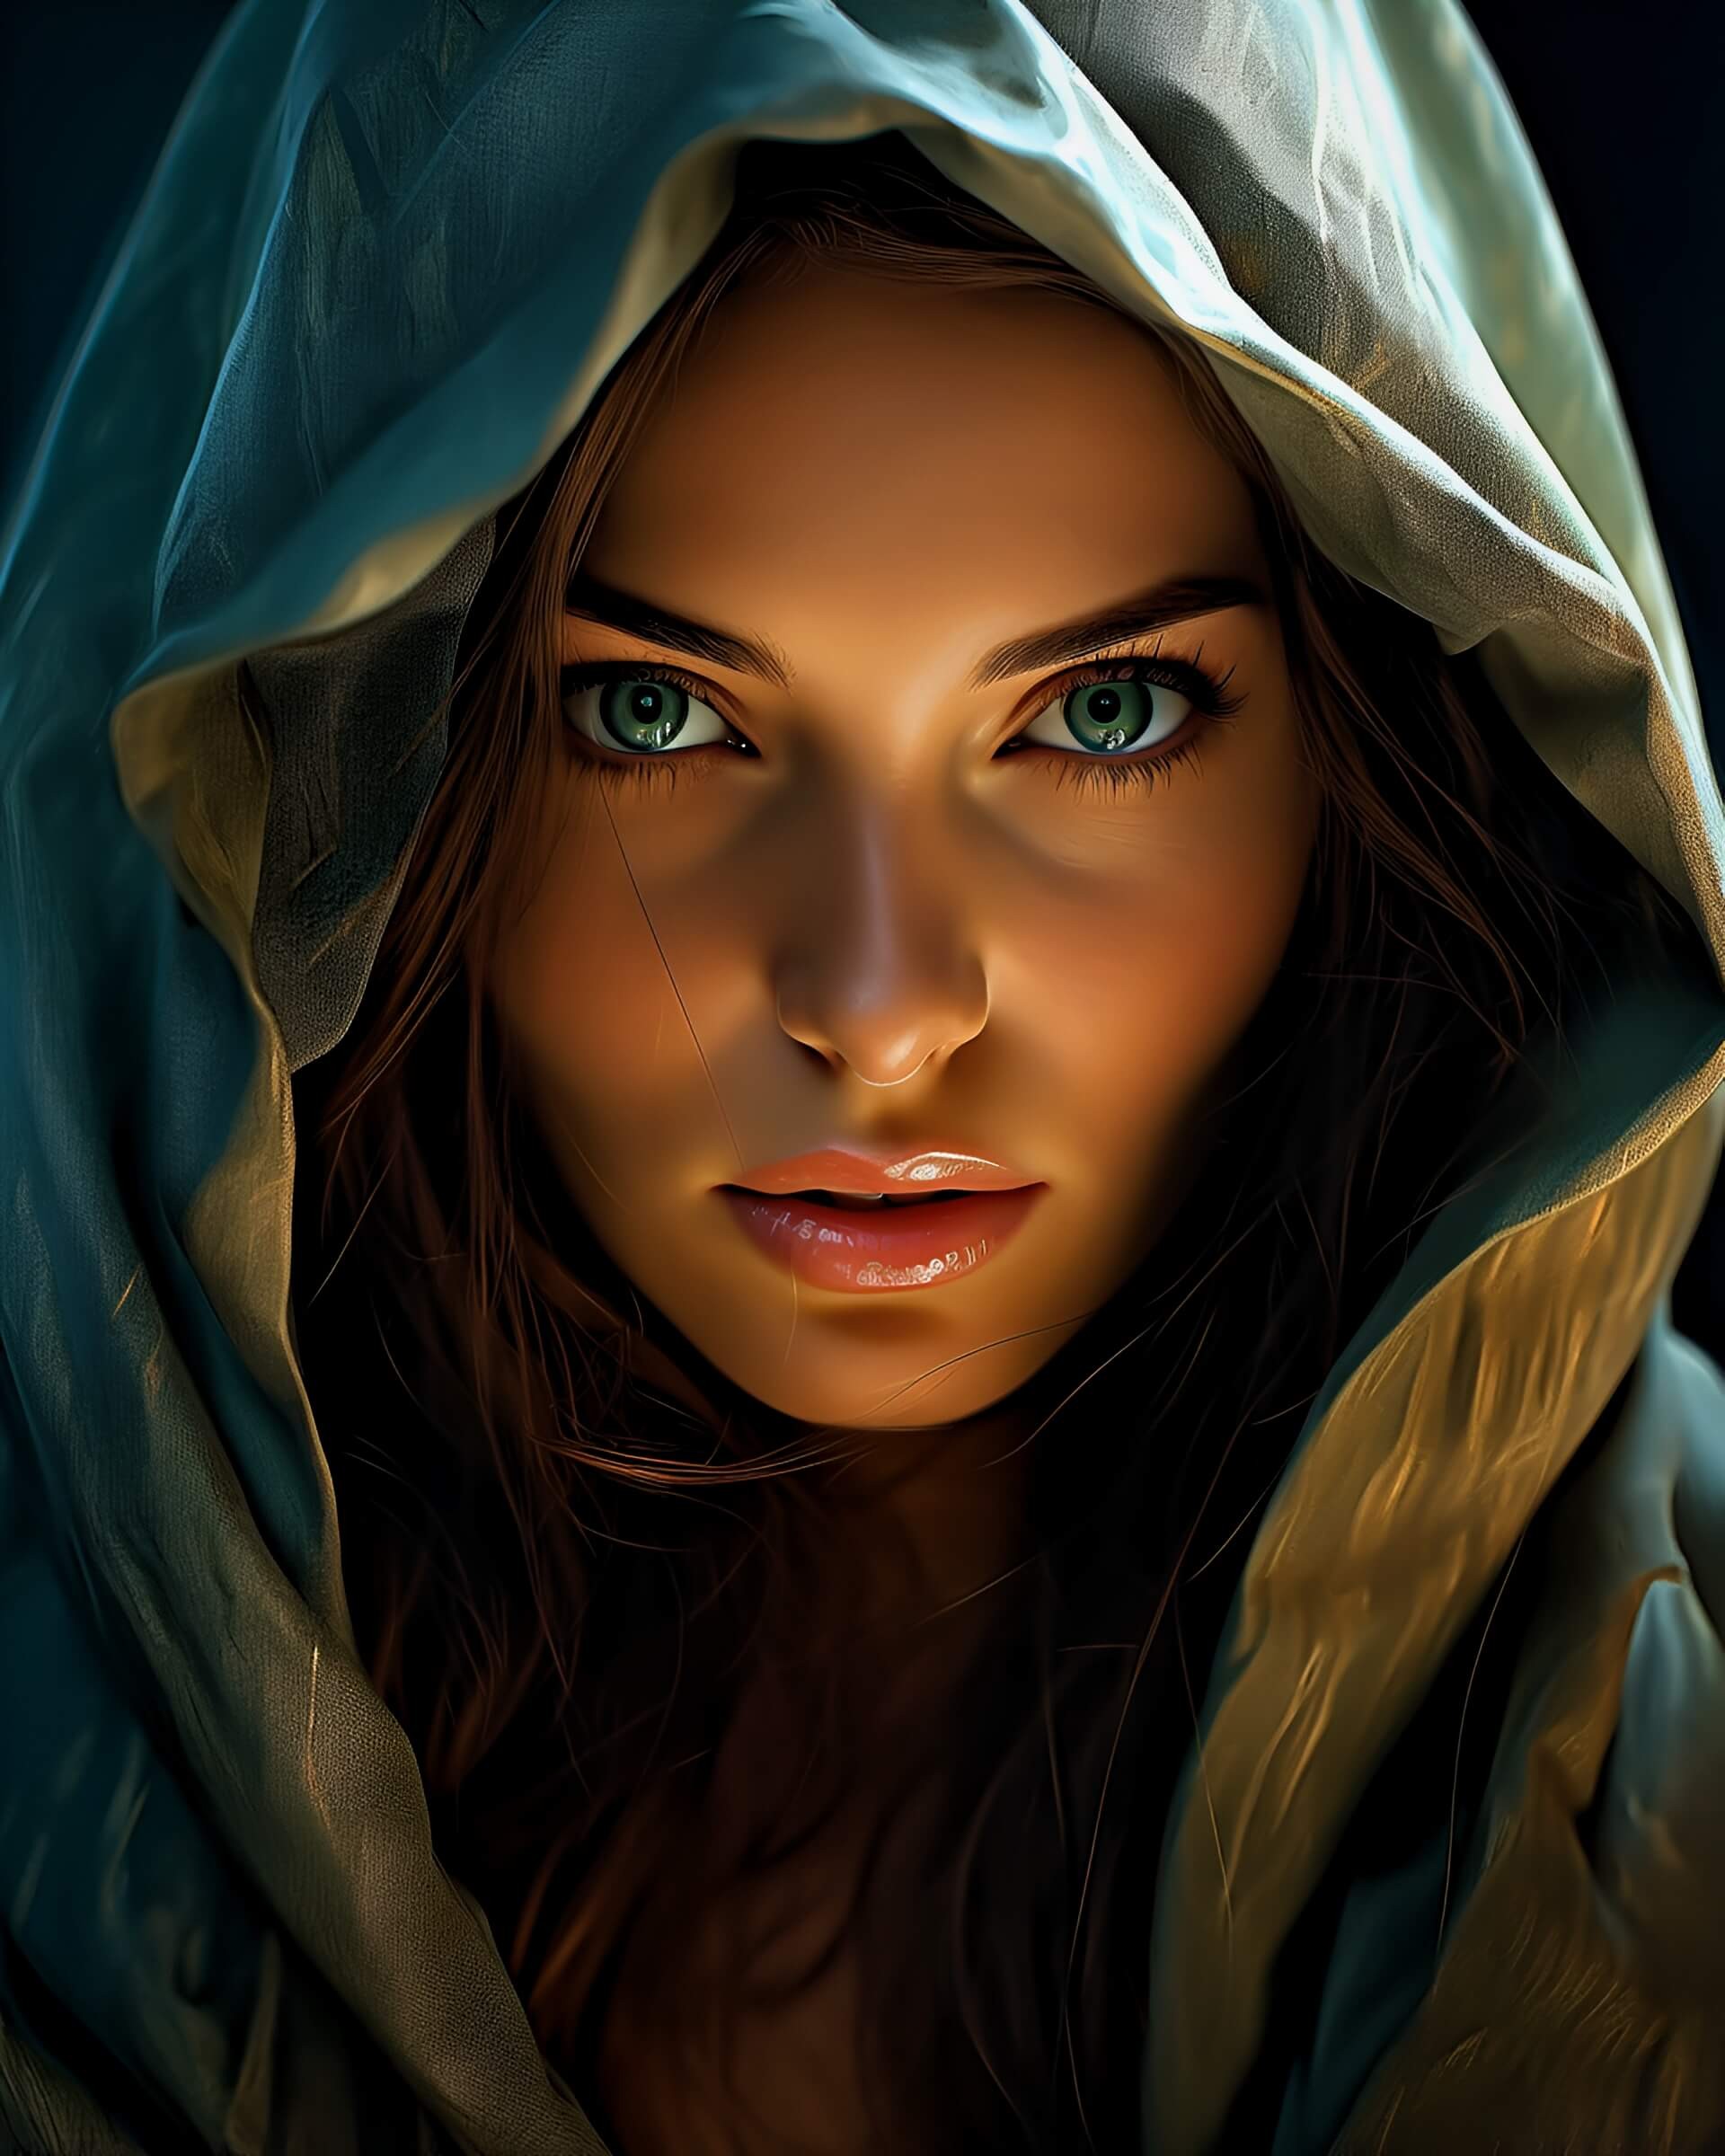 Woman with piercing eyes in AI artwork.